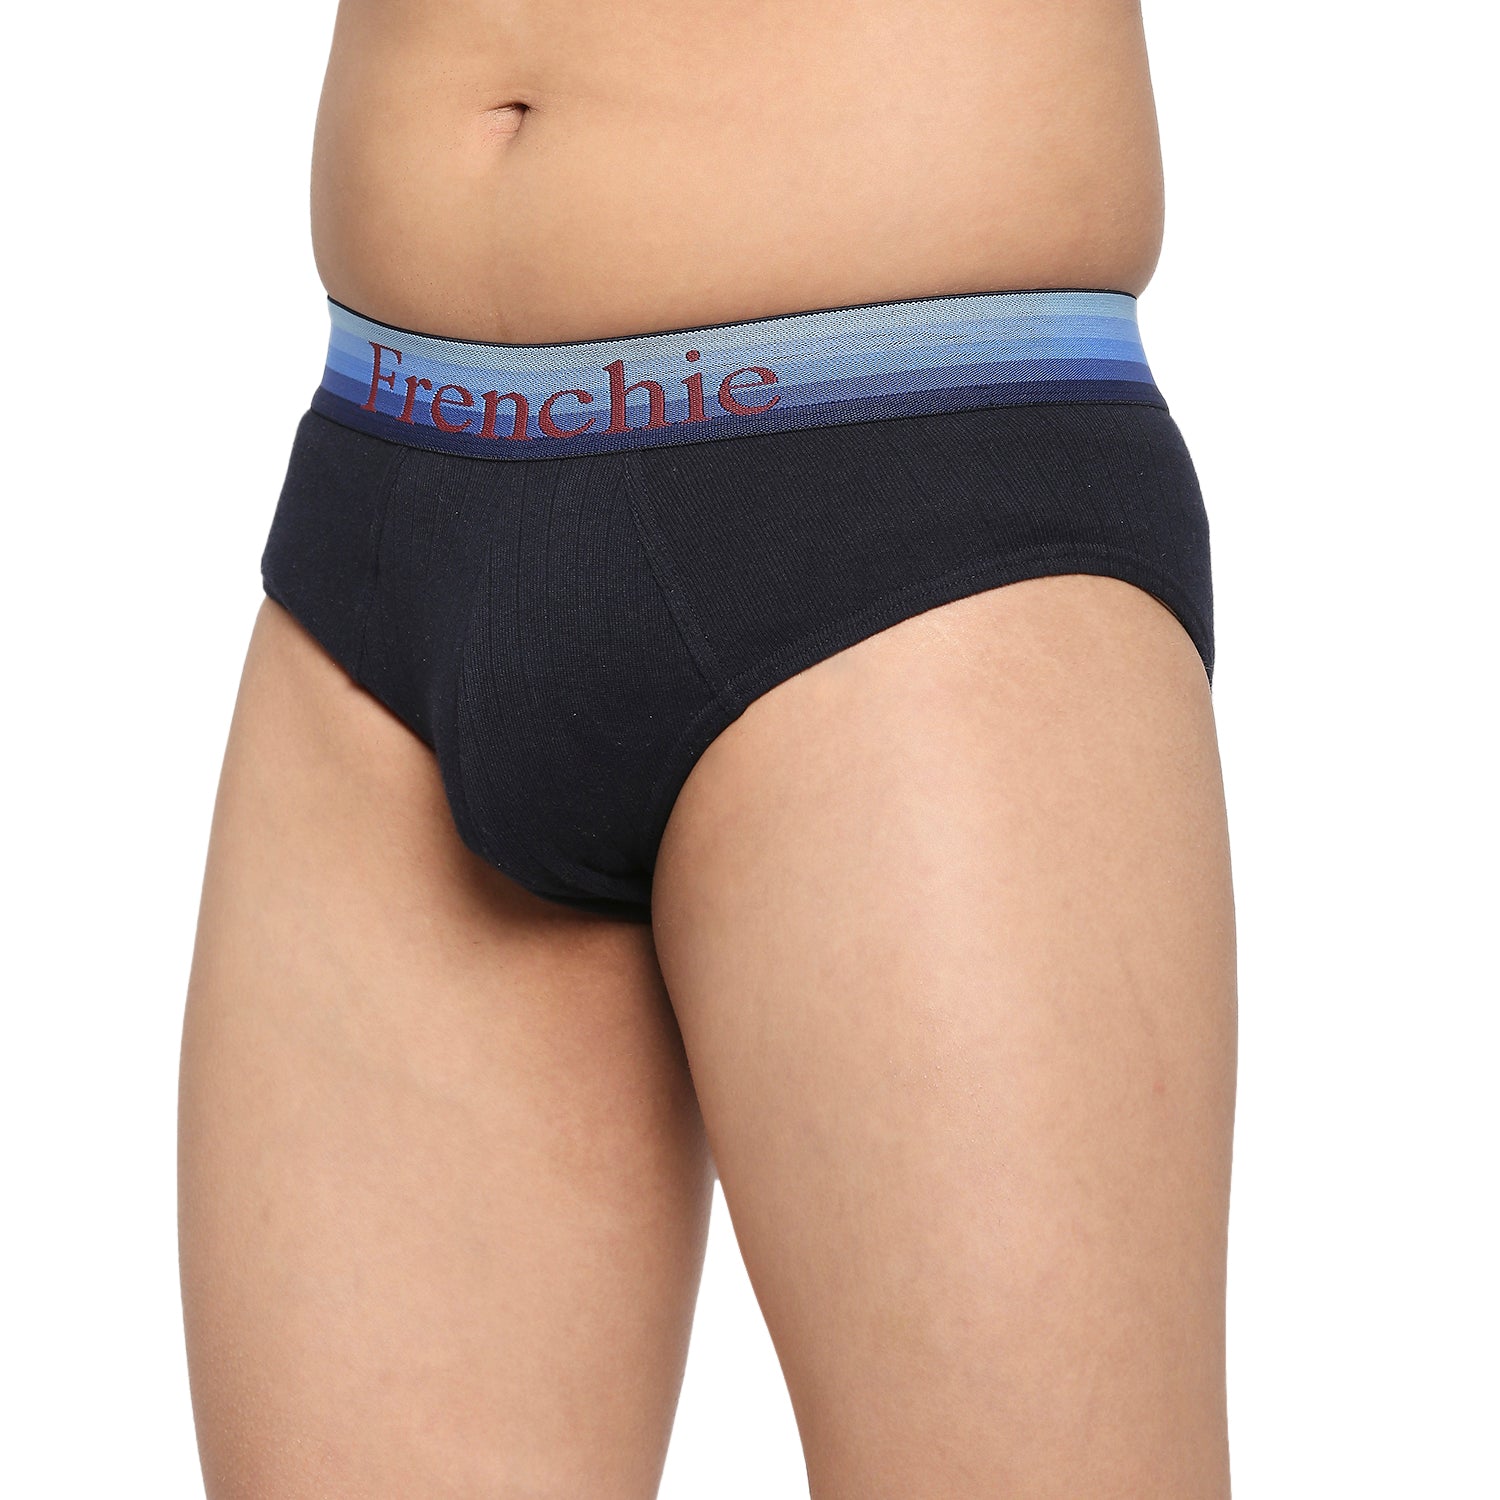 FRENCHIE Teenagers Cotton Brief Navy Blue and Gray - Pack of 2